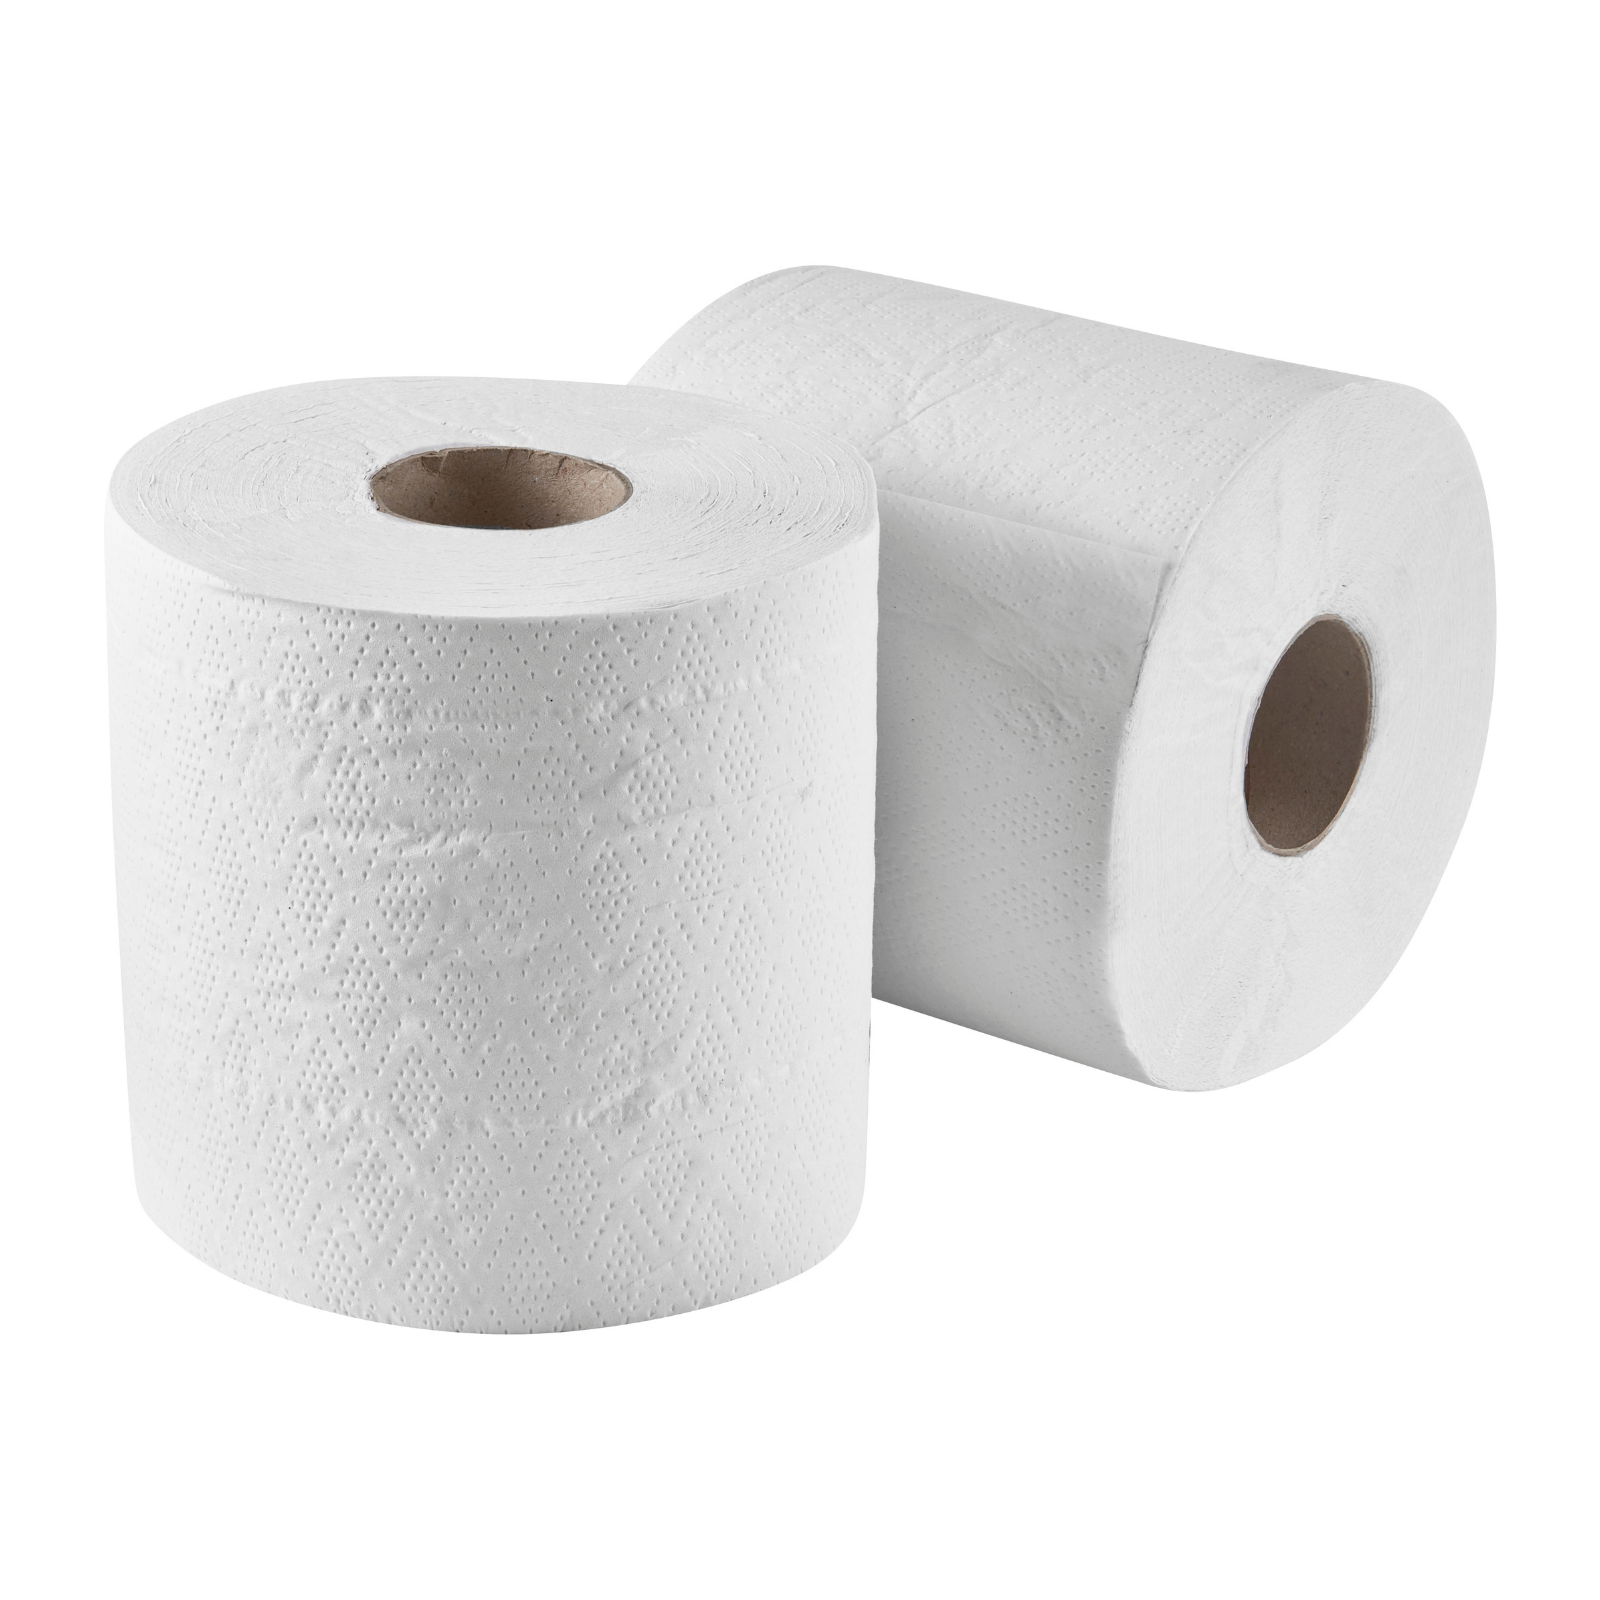 2 Ply White Embossed Centre Feed Rolls - 150m